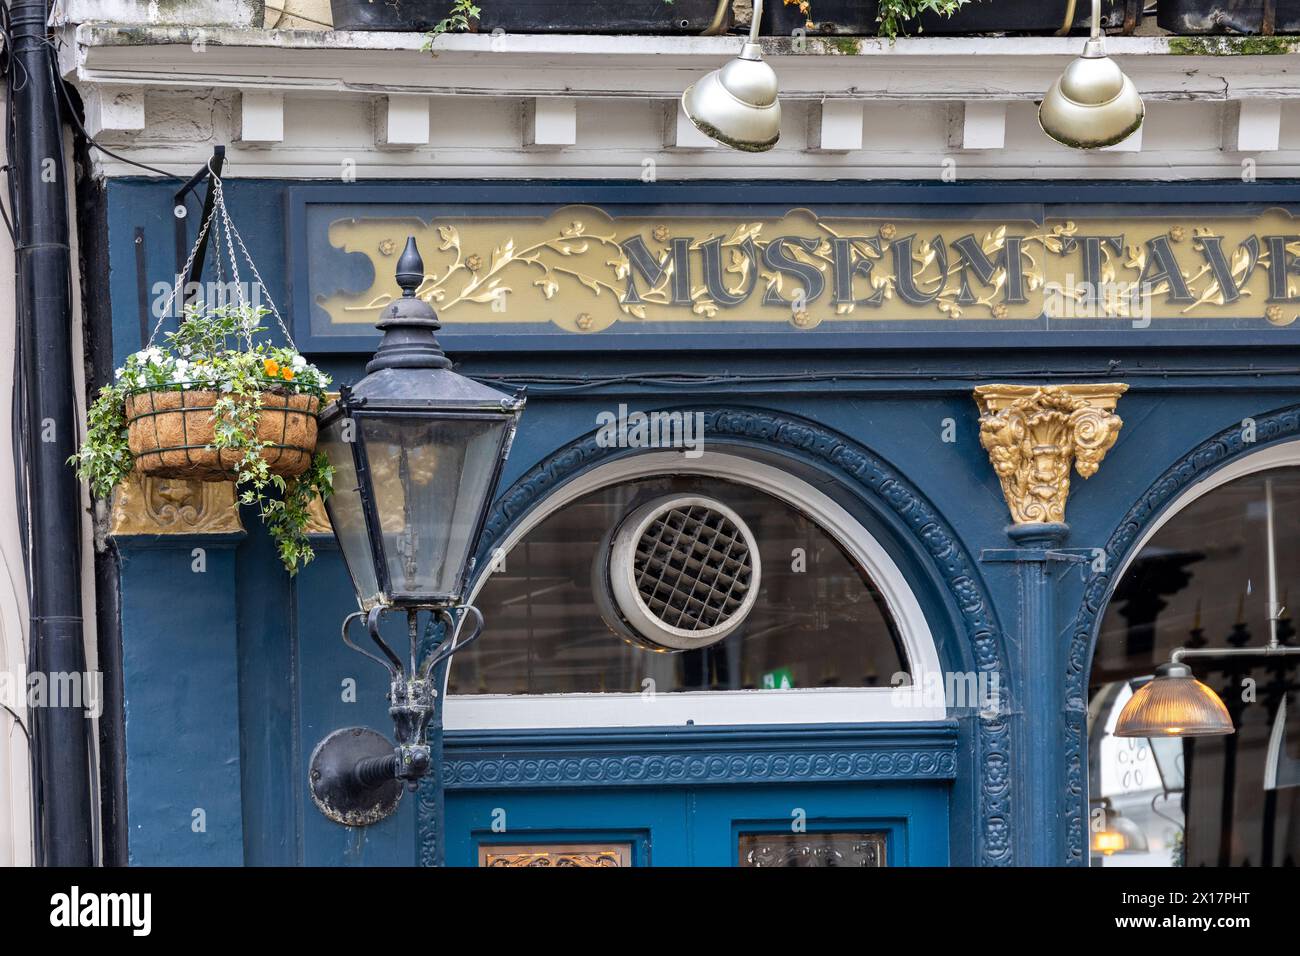 Vintage tavern in Soho, Central London, with classic blue façade and gold lettering. Stock Photo